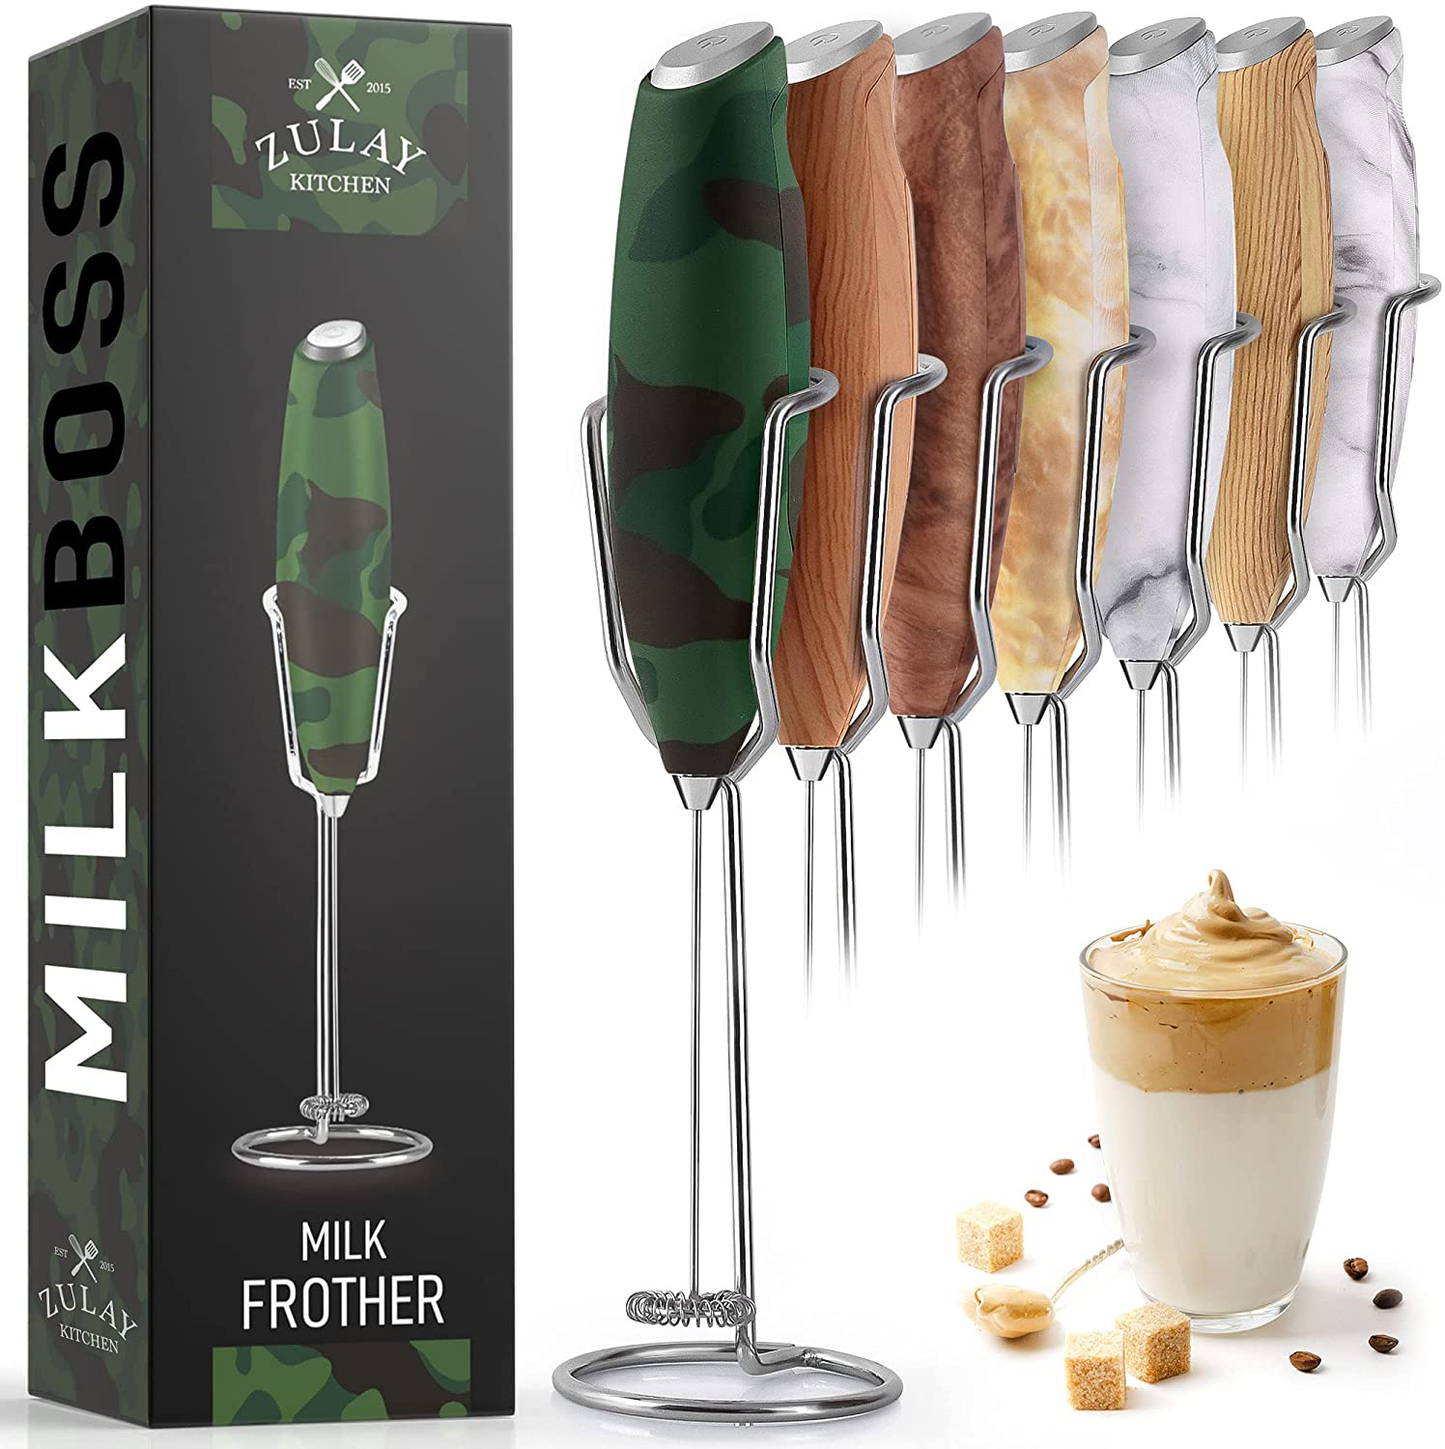 Zulay Milk Frother Handheld Foam Maker with Upgraded Holster Stand - Powerful Coffee Frother Electric Handheld Mixer - Battery Operated Frother for Coffee with Stainless Steel Electric Whisk (Marble)